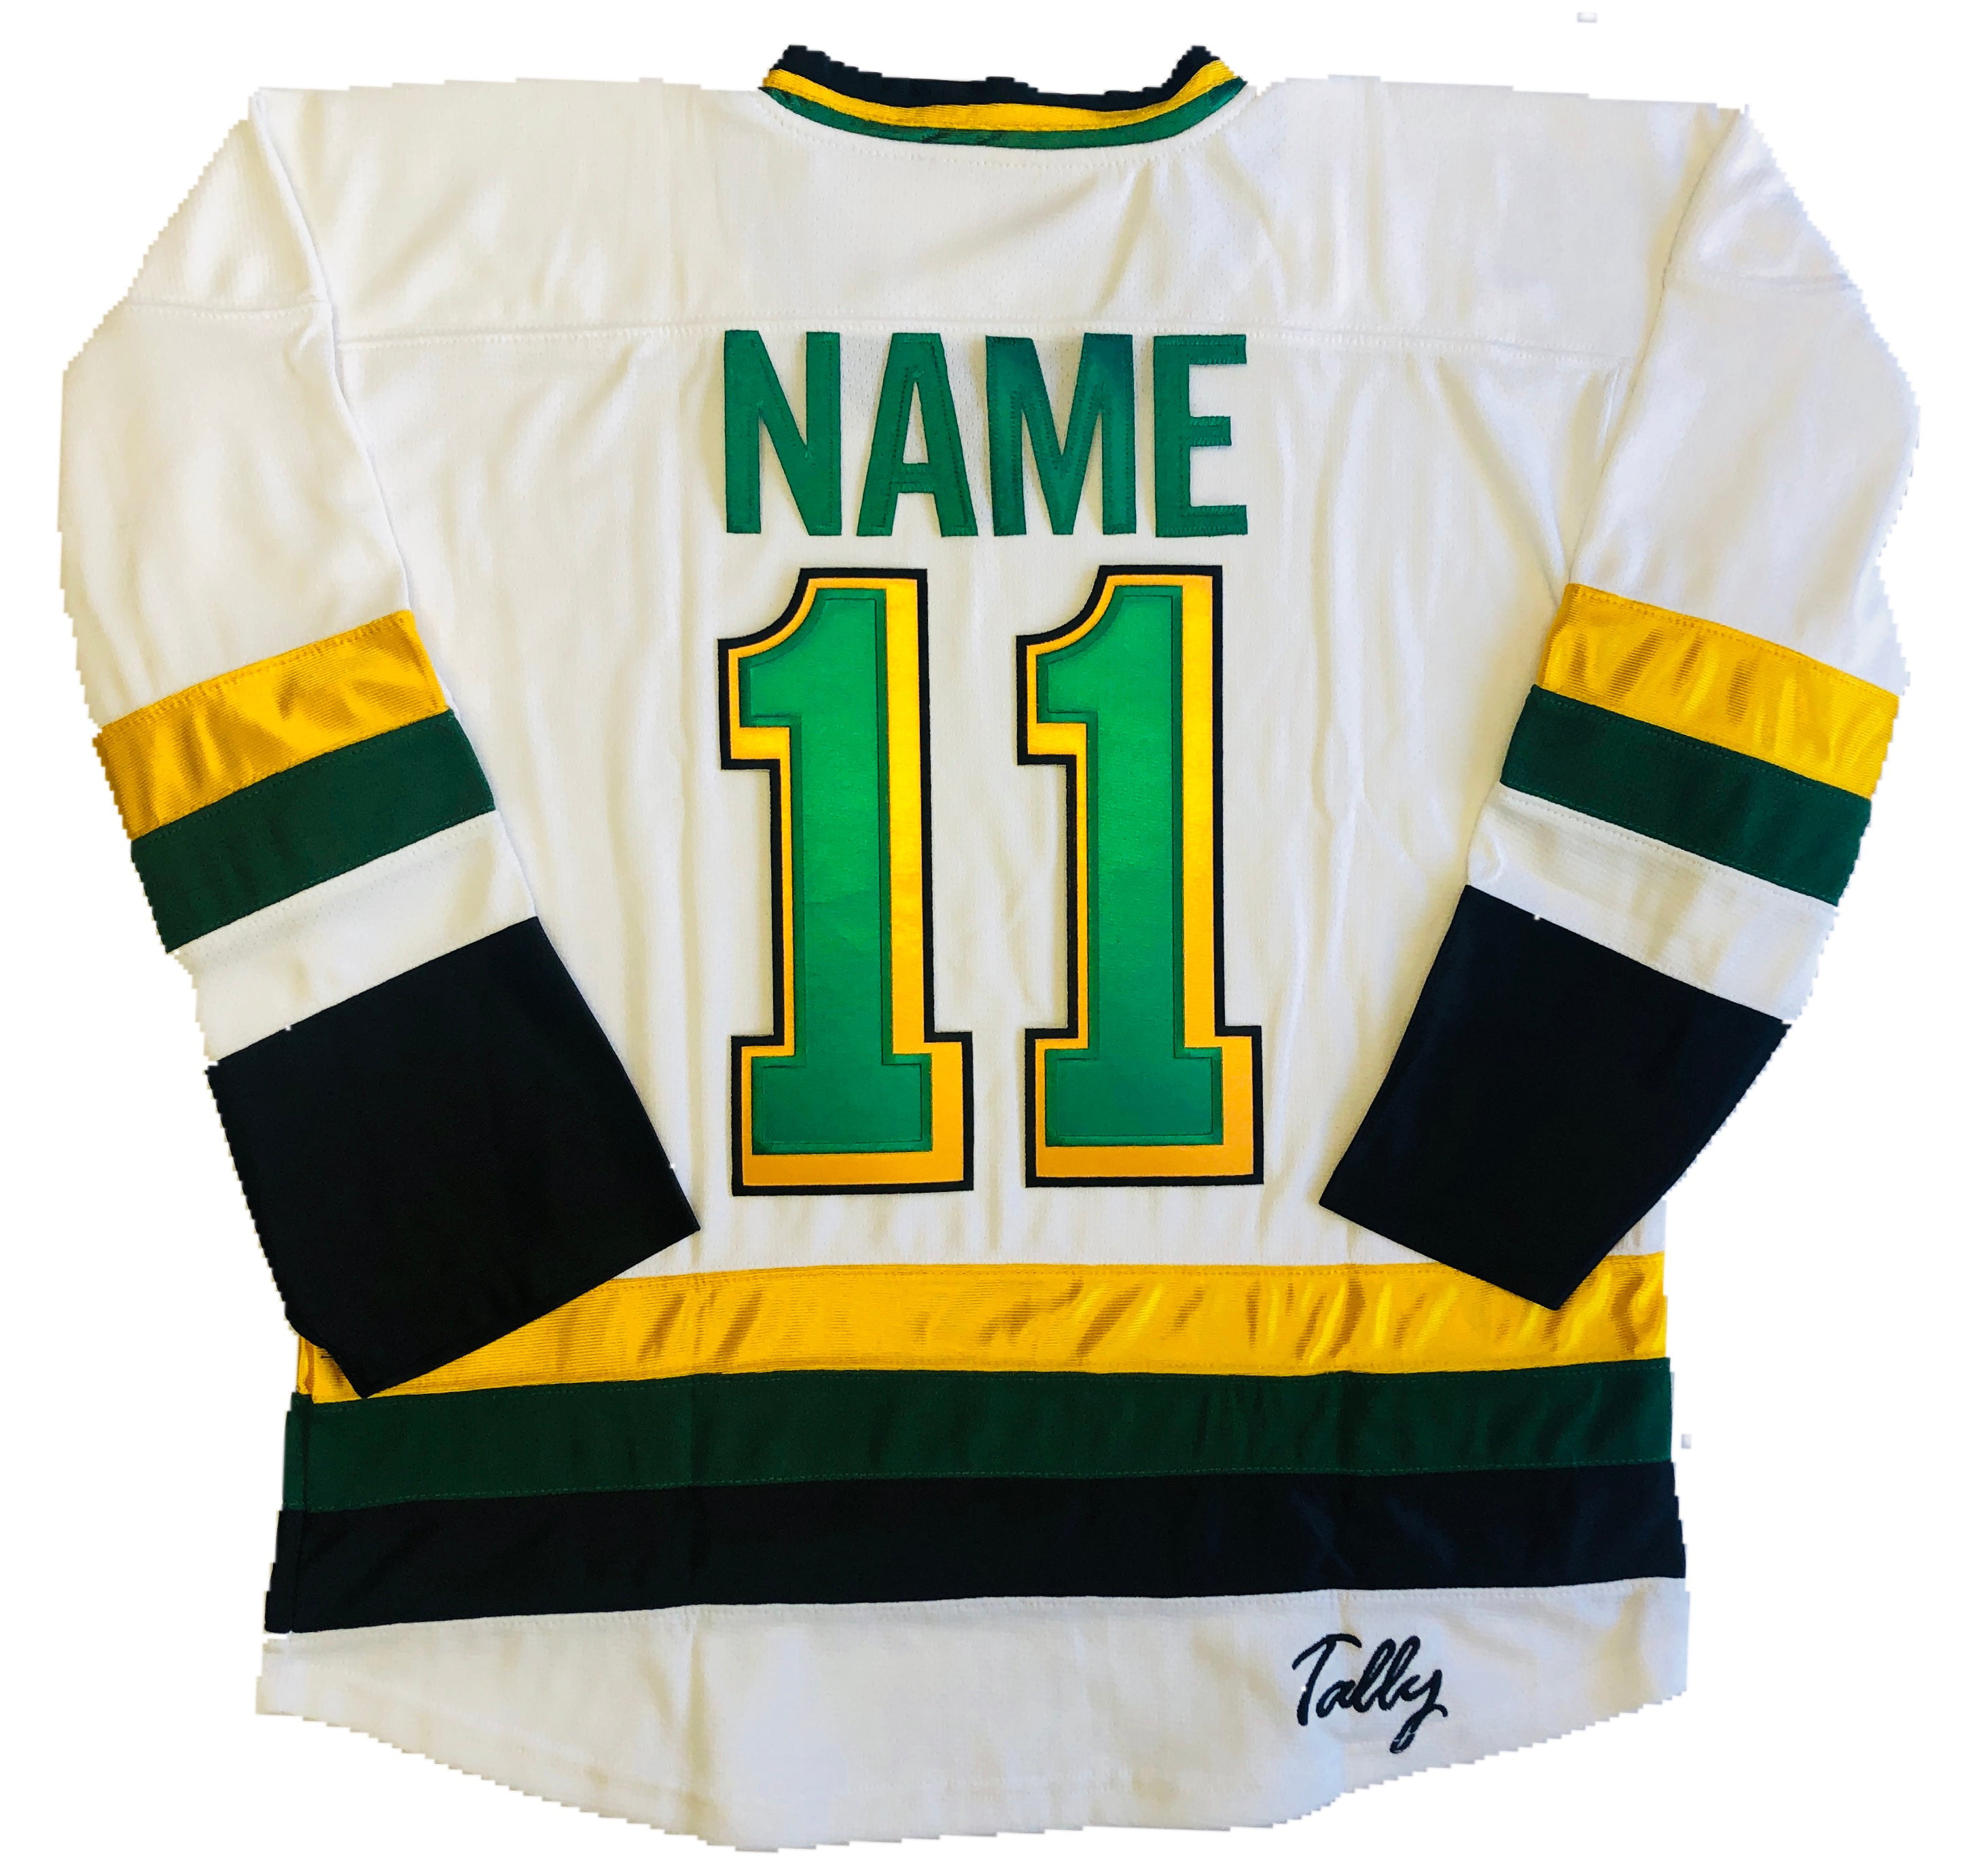 Green and White Hockey Jerseys with The North Stars Twill Logo, Size: Adult 2XL